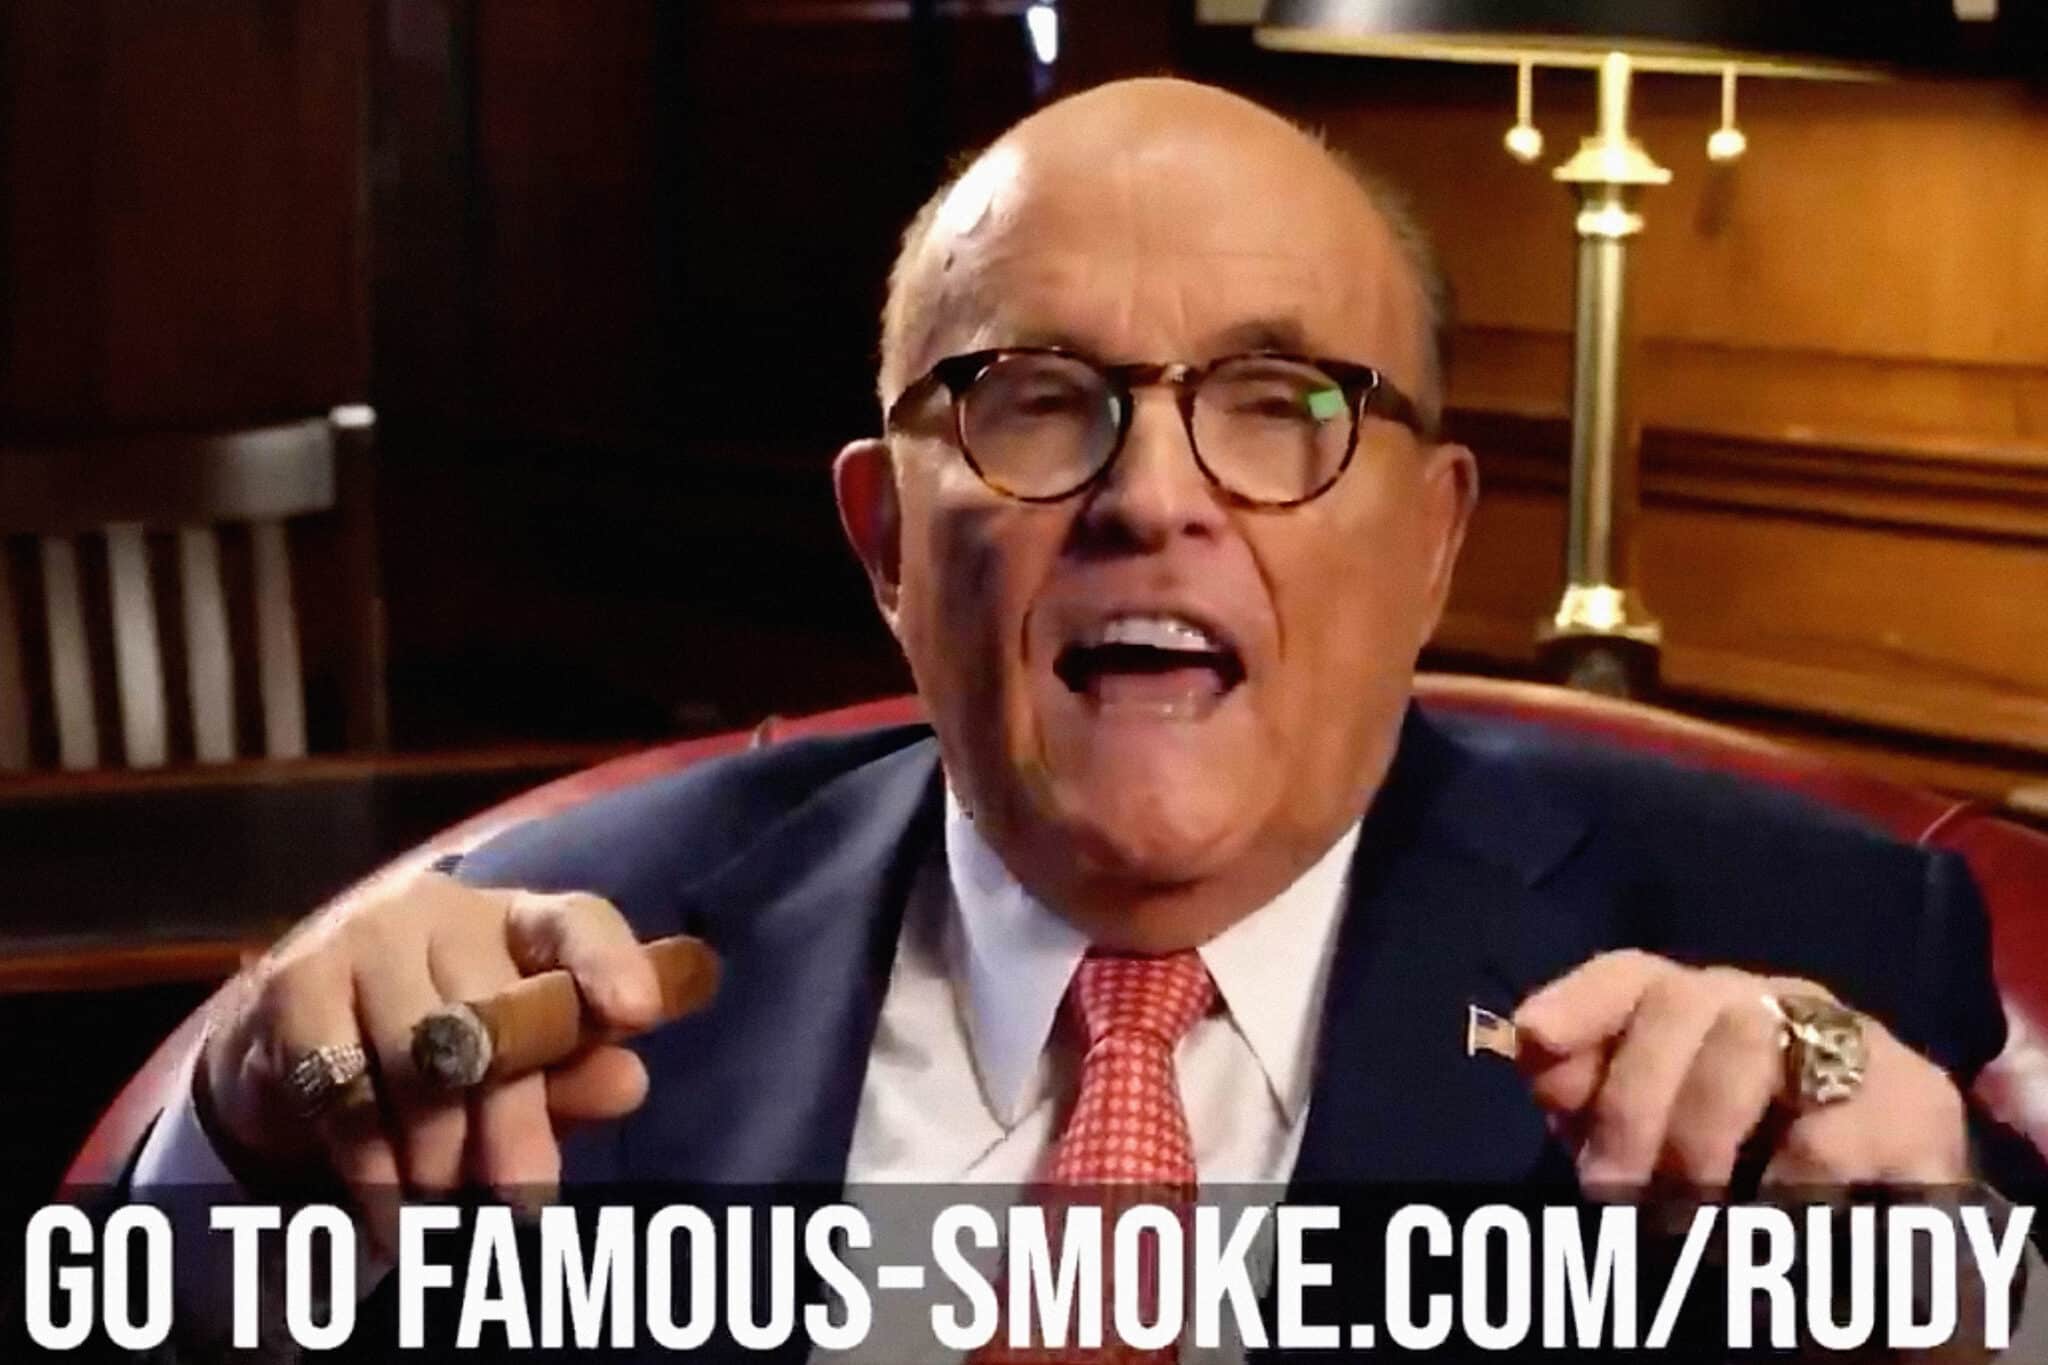 YouTube Suspends Rudy Giuliani Over ‘Election Integrity Policy,’ Nicotine Use